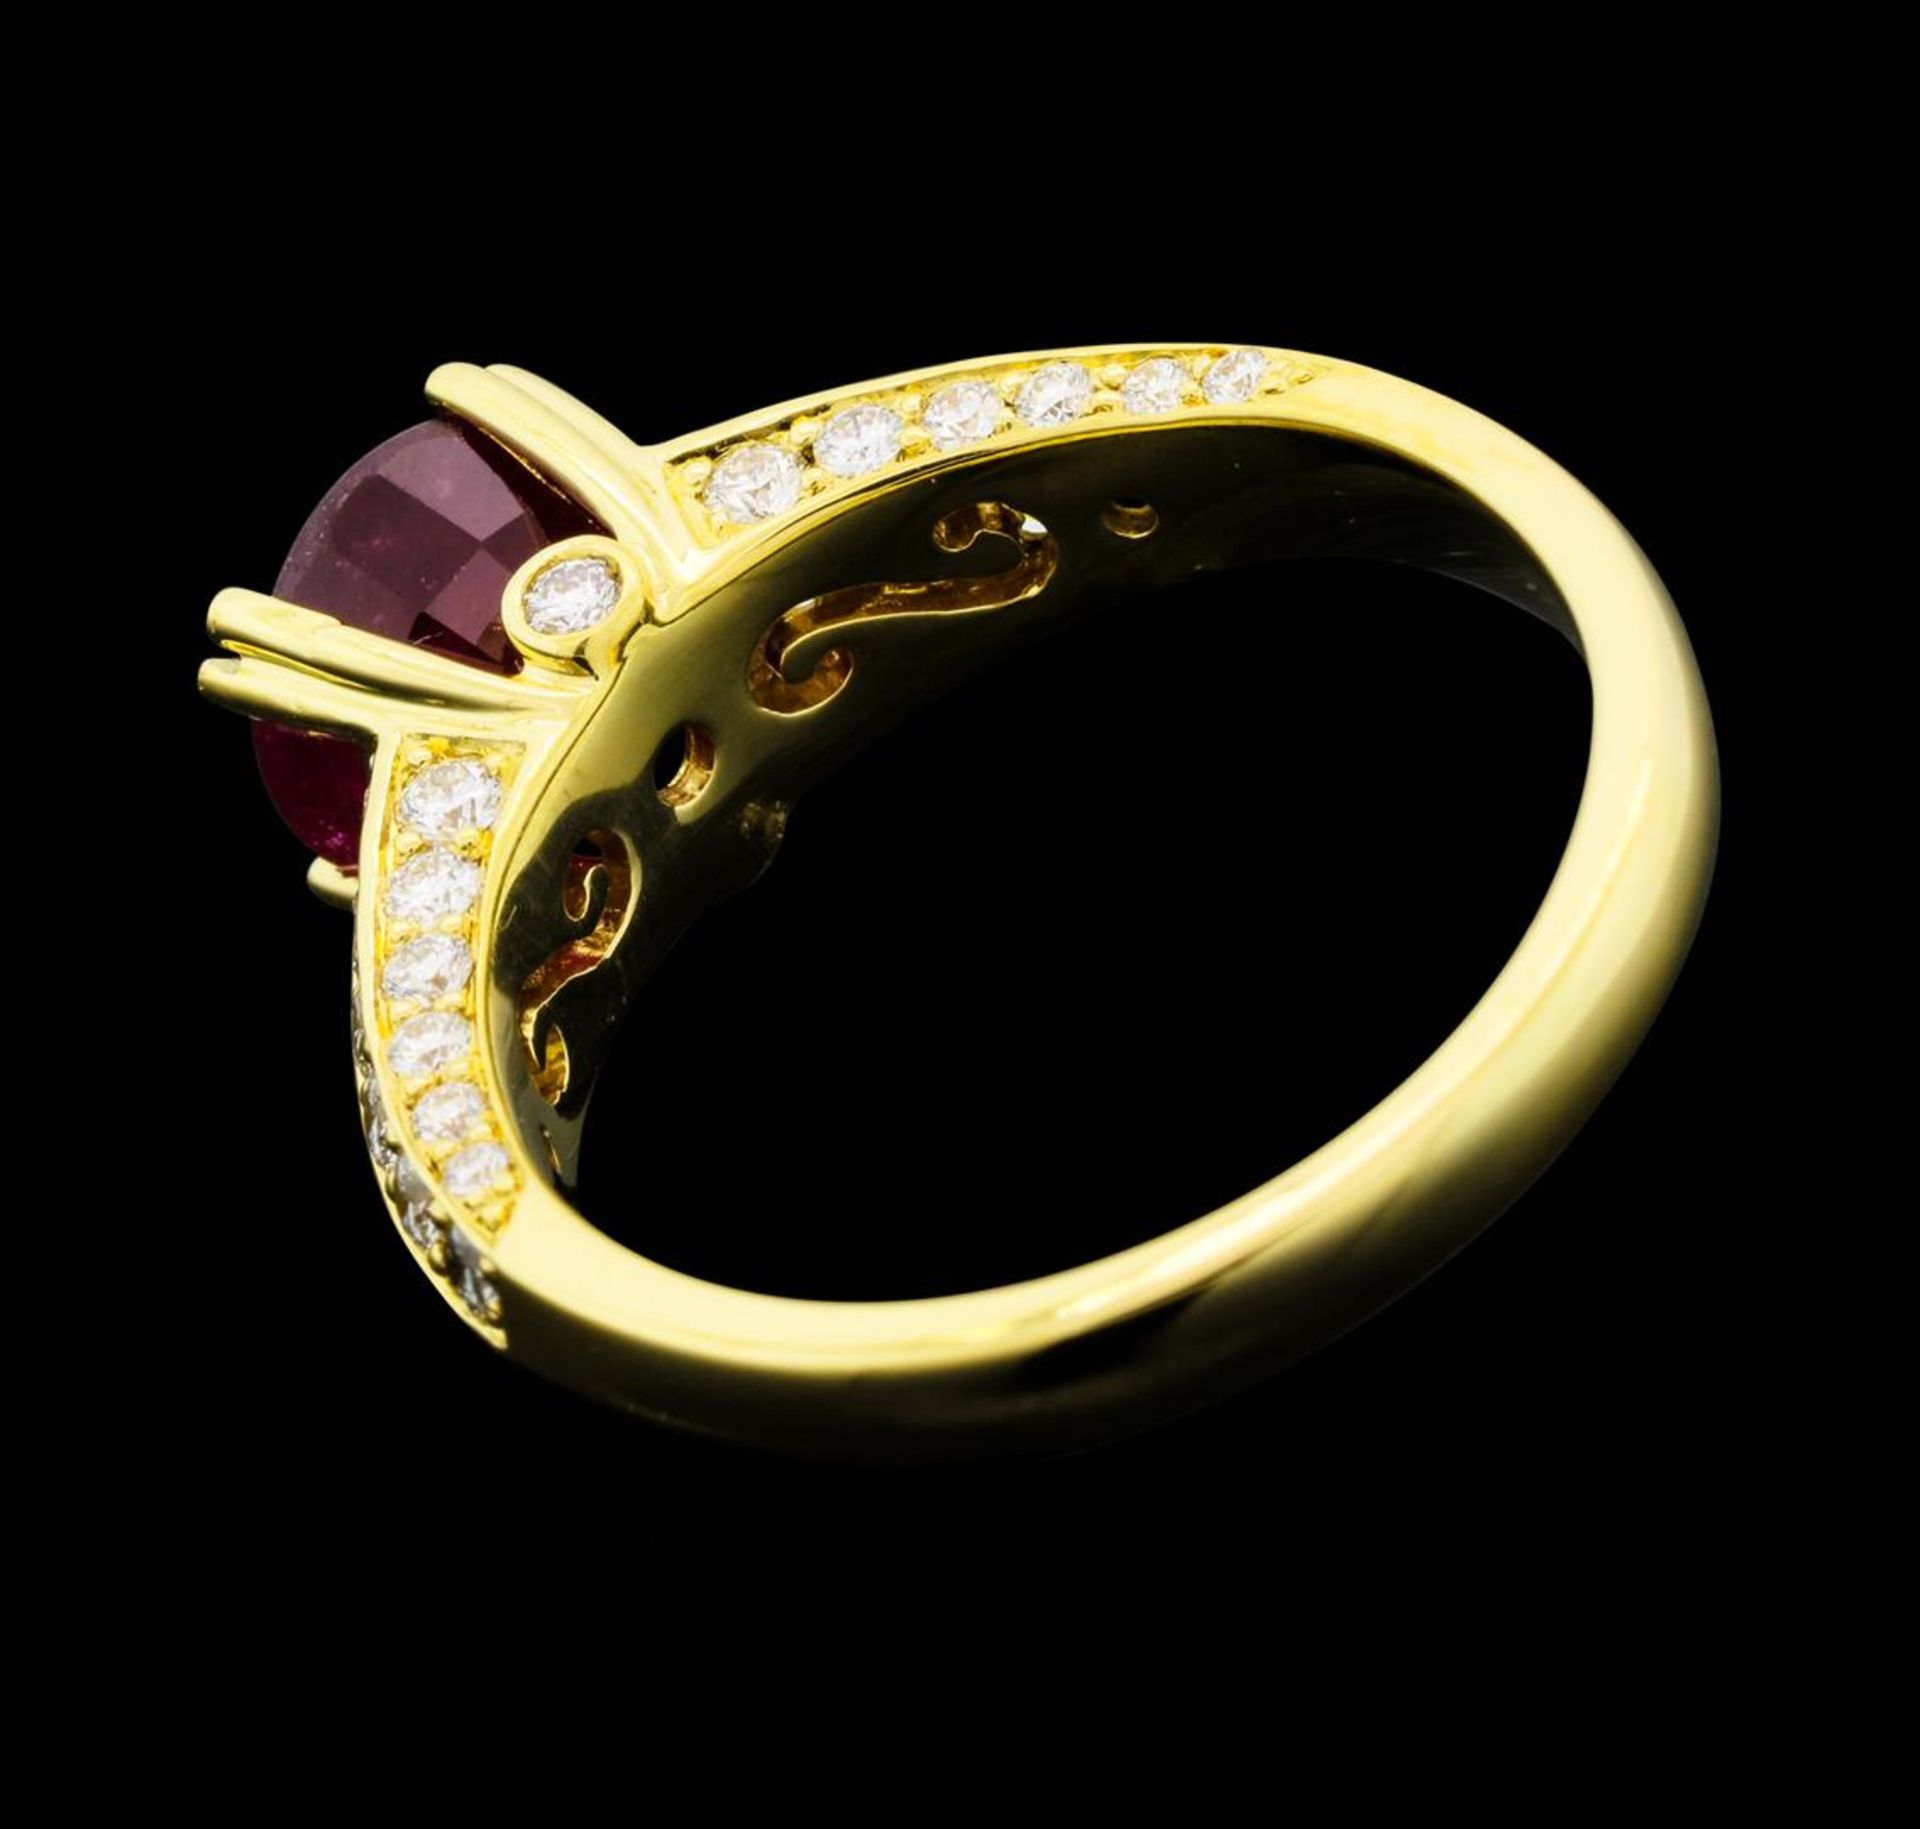 2.54 ctw Ruby And Diamond Ring - 18KT Yellow Gold - Image 3 of 5